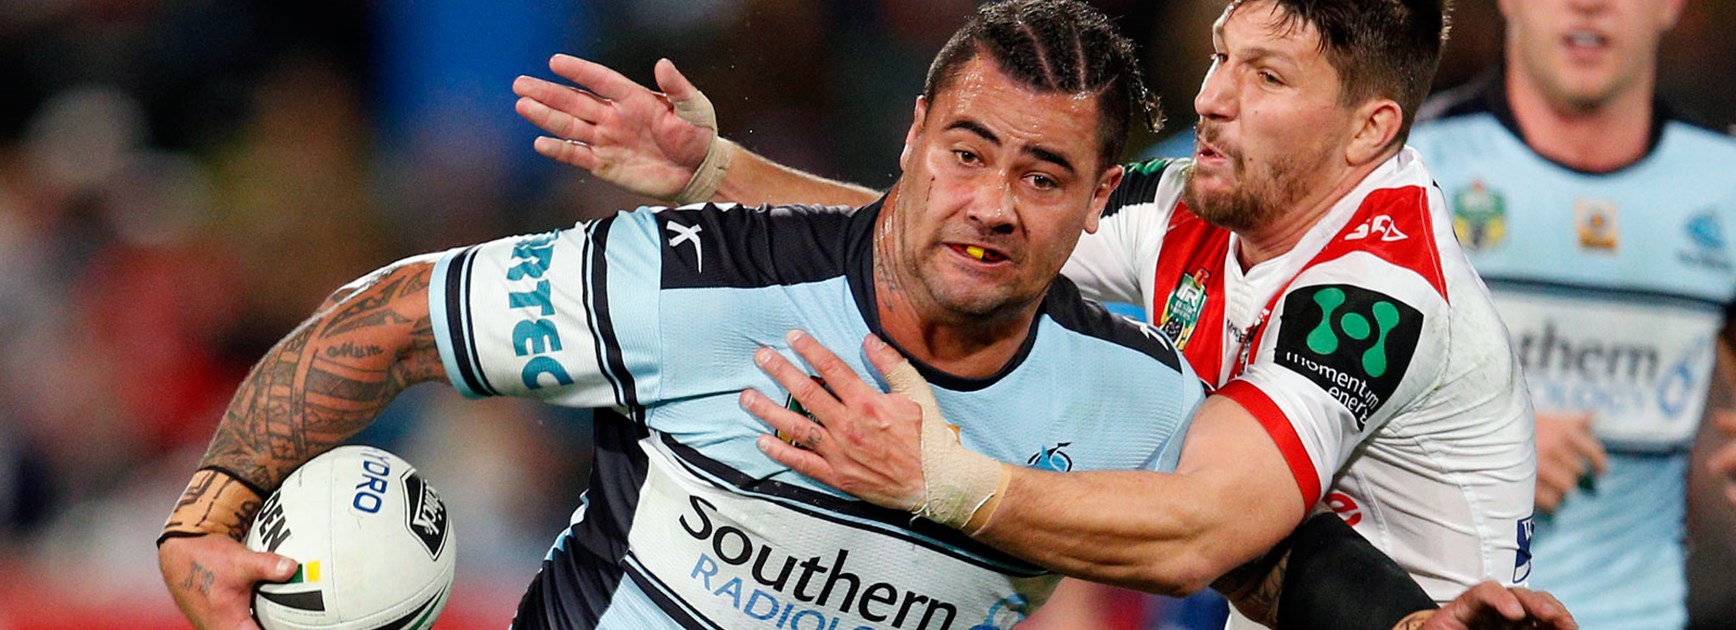 Sharks prop Andrew Fifita against the Dragons in Round 23.